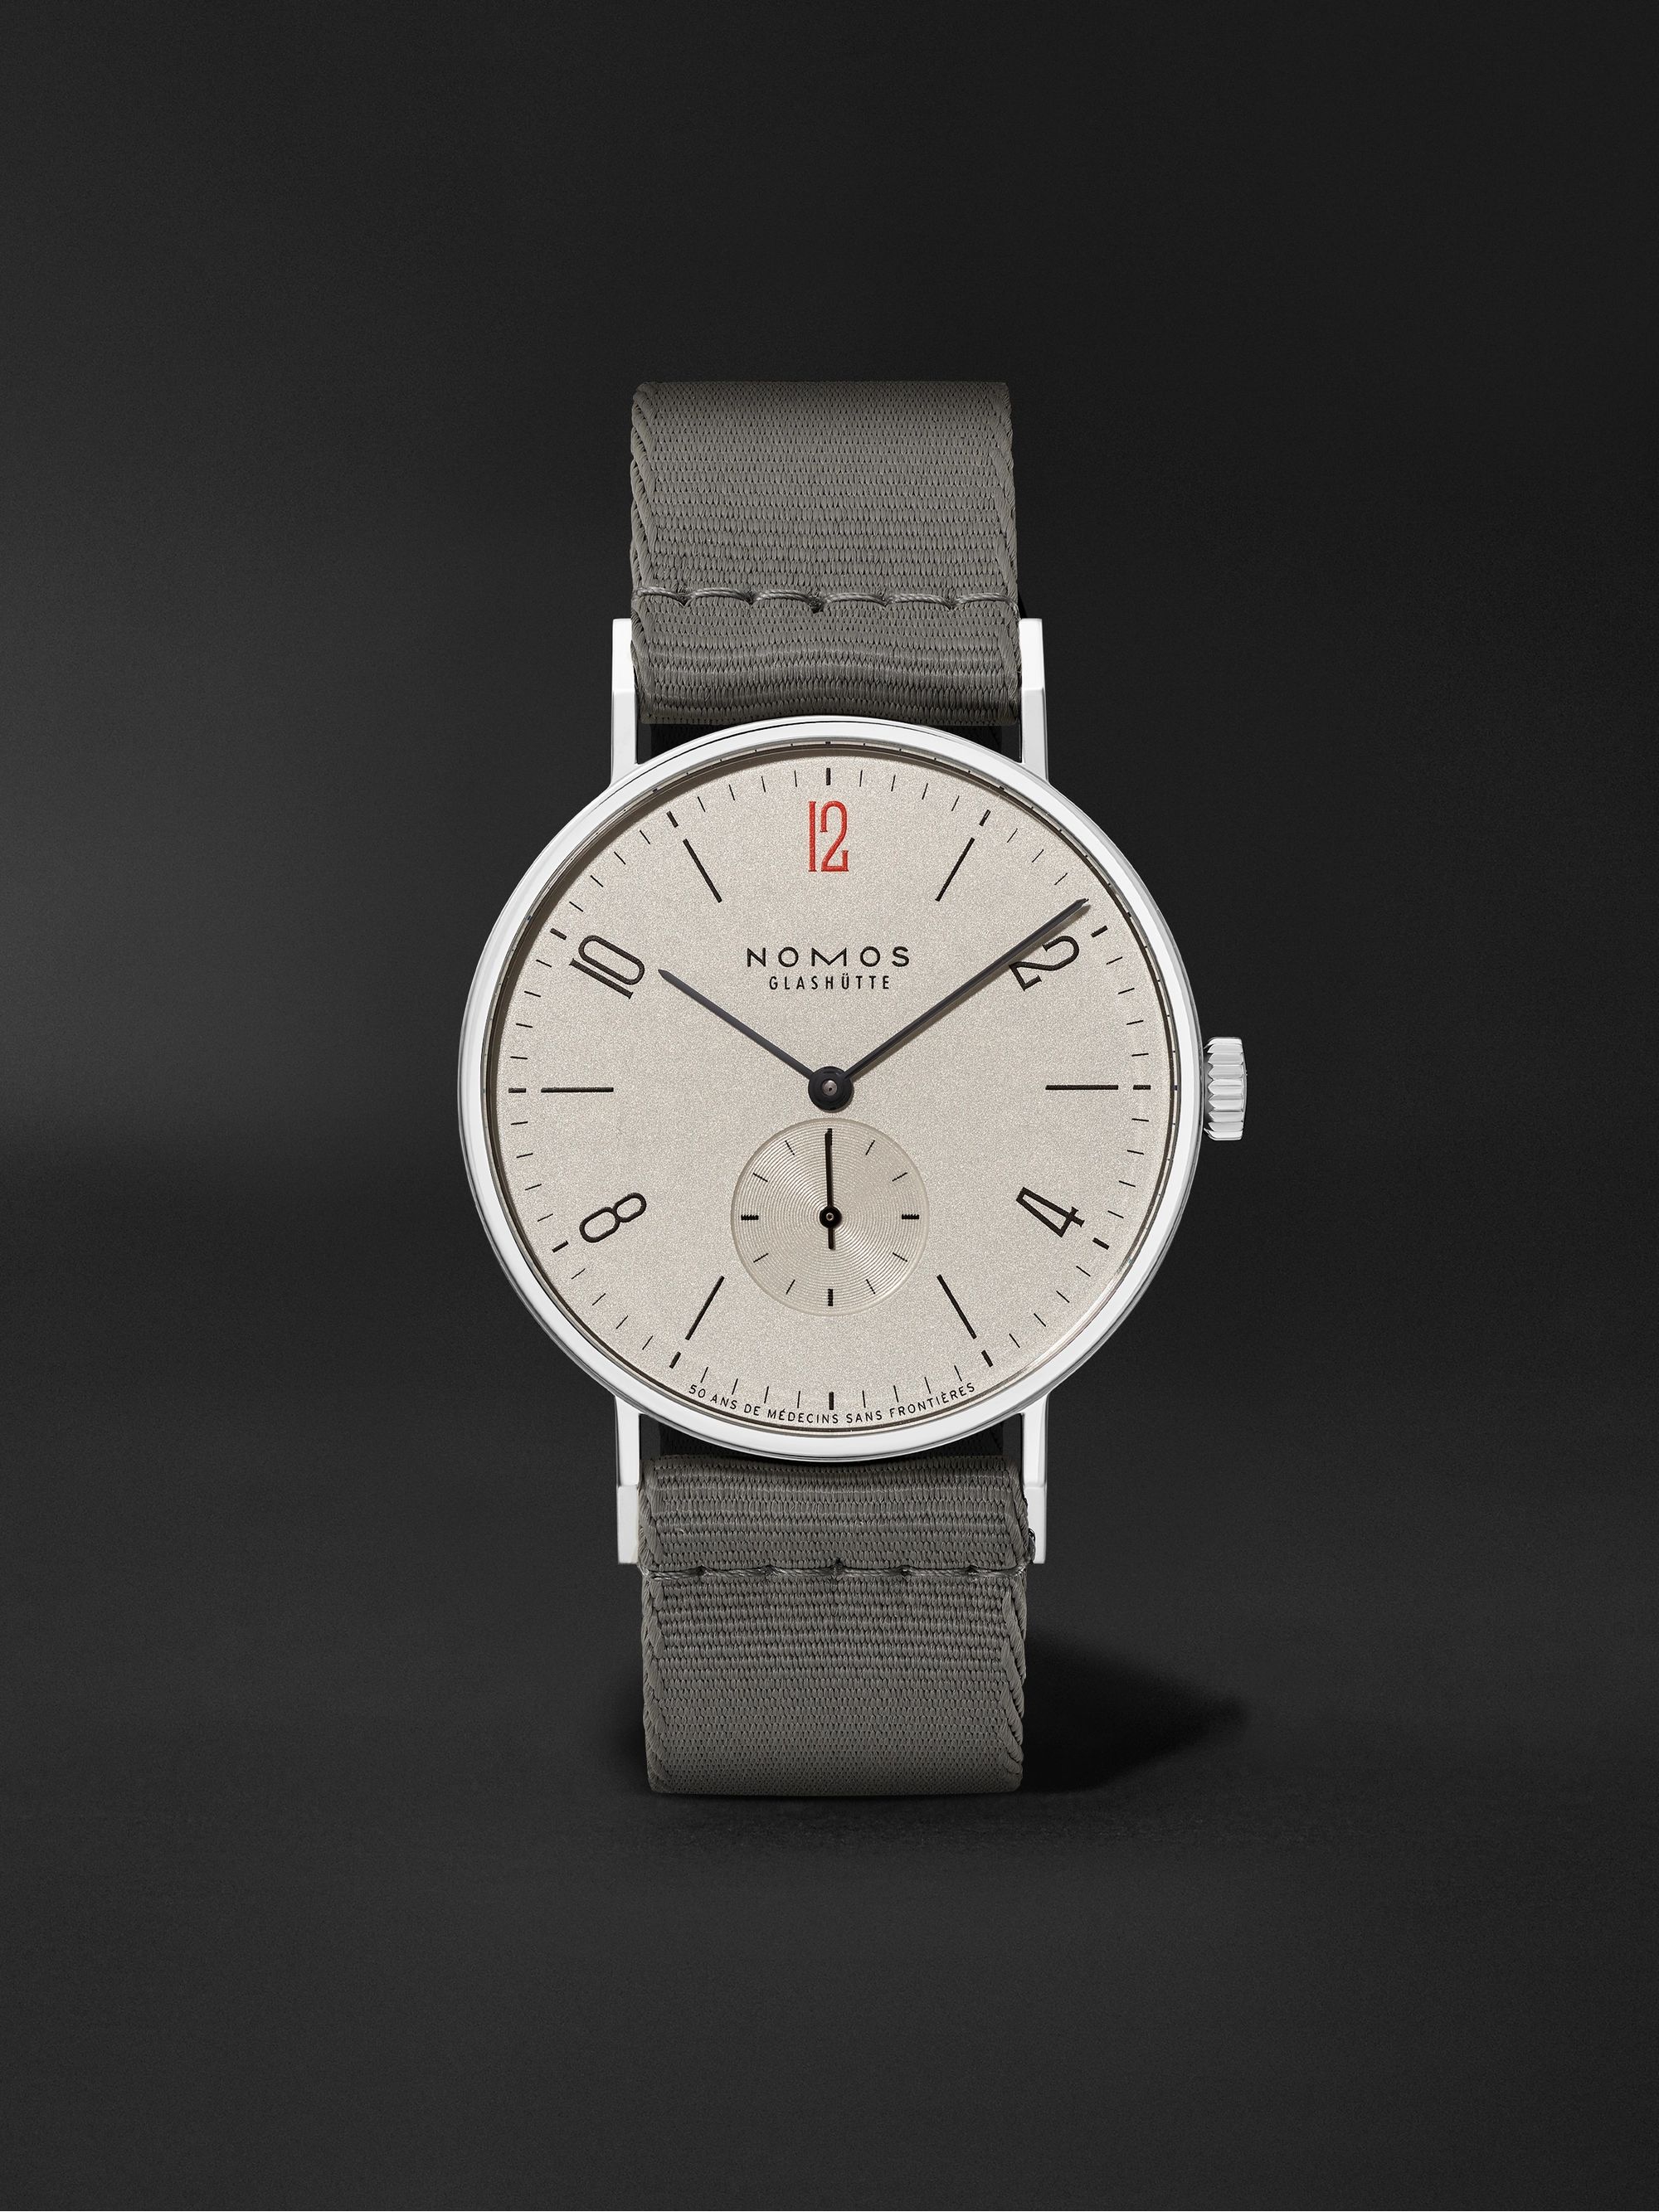 NOMOS GLASHÜTTE Tangente 38 Limited Edition Hand-Wound 37.5mm Stainless Steel and Canvas Watch, Ref. No. 165.S50